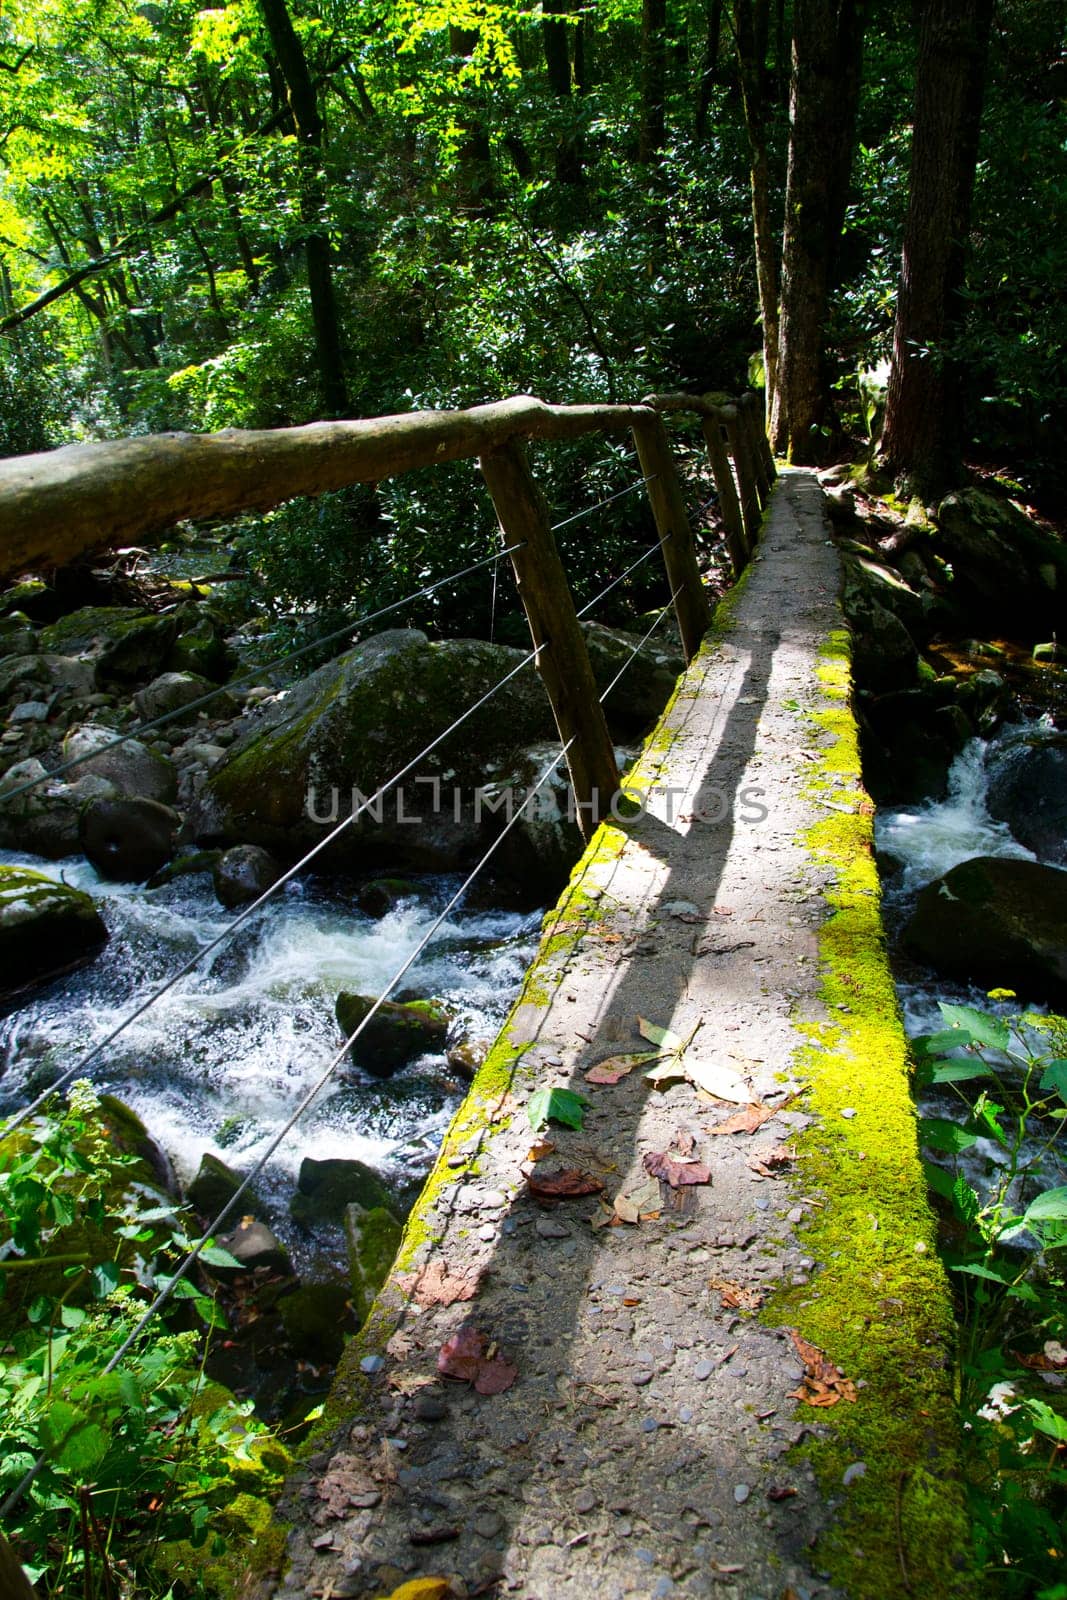 Rustic Footbridge Over Lively Stream in Lush Tennessee Forest by njproductions